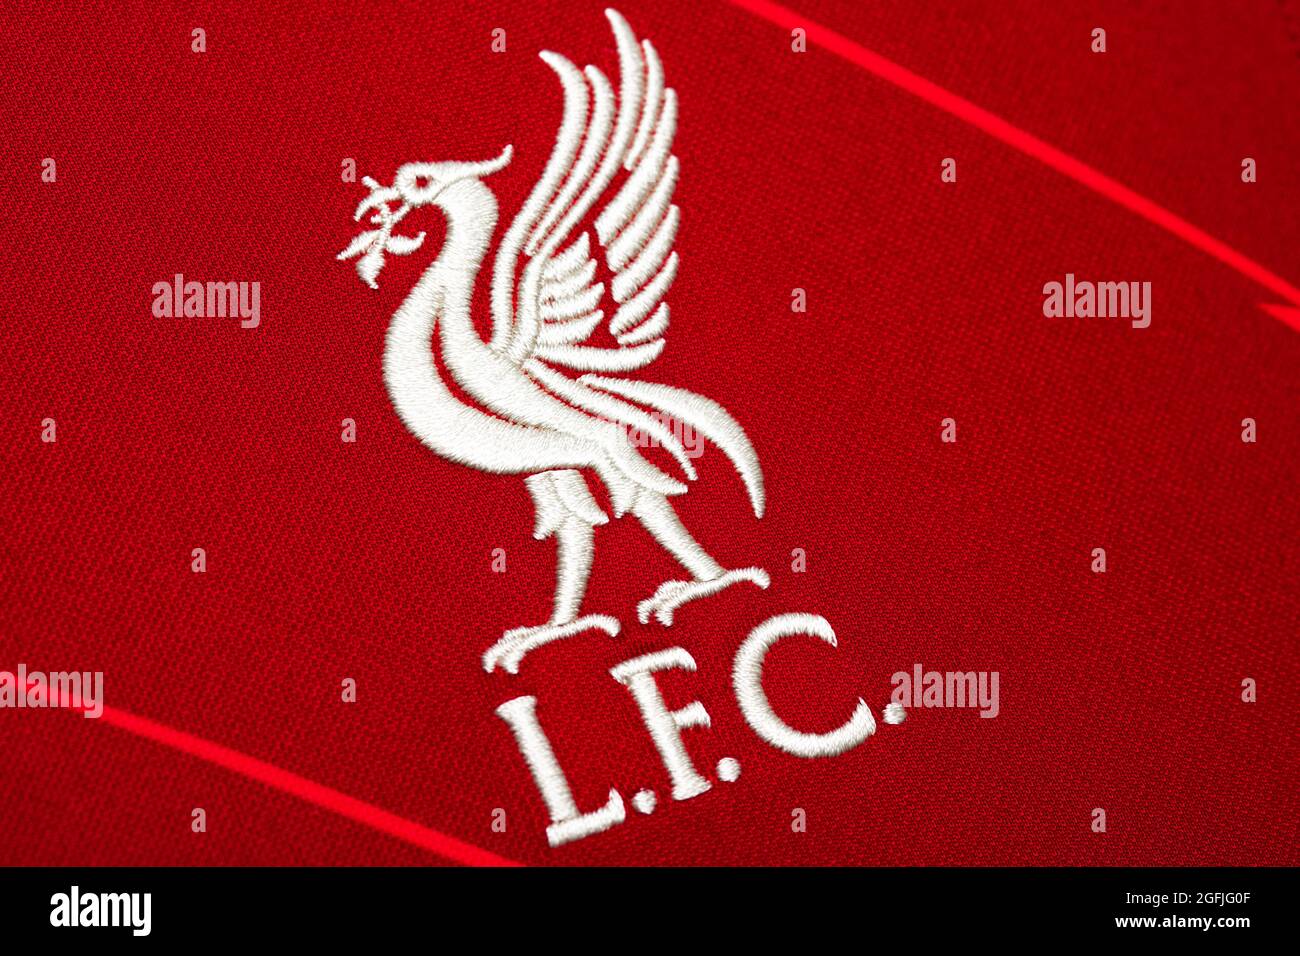 Close up of Liverpool FC kit 2020/21. Stock Photo